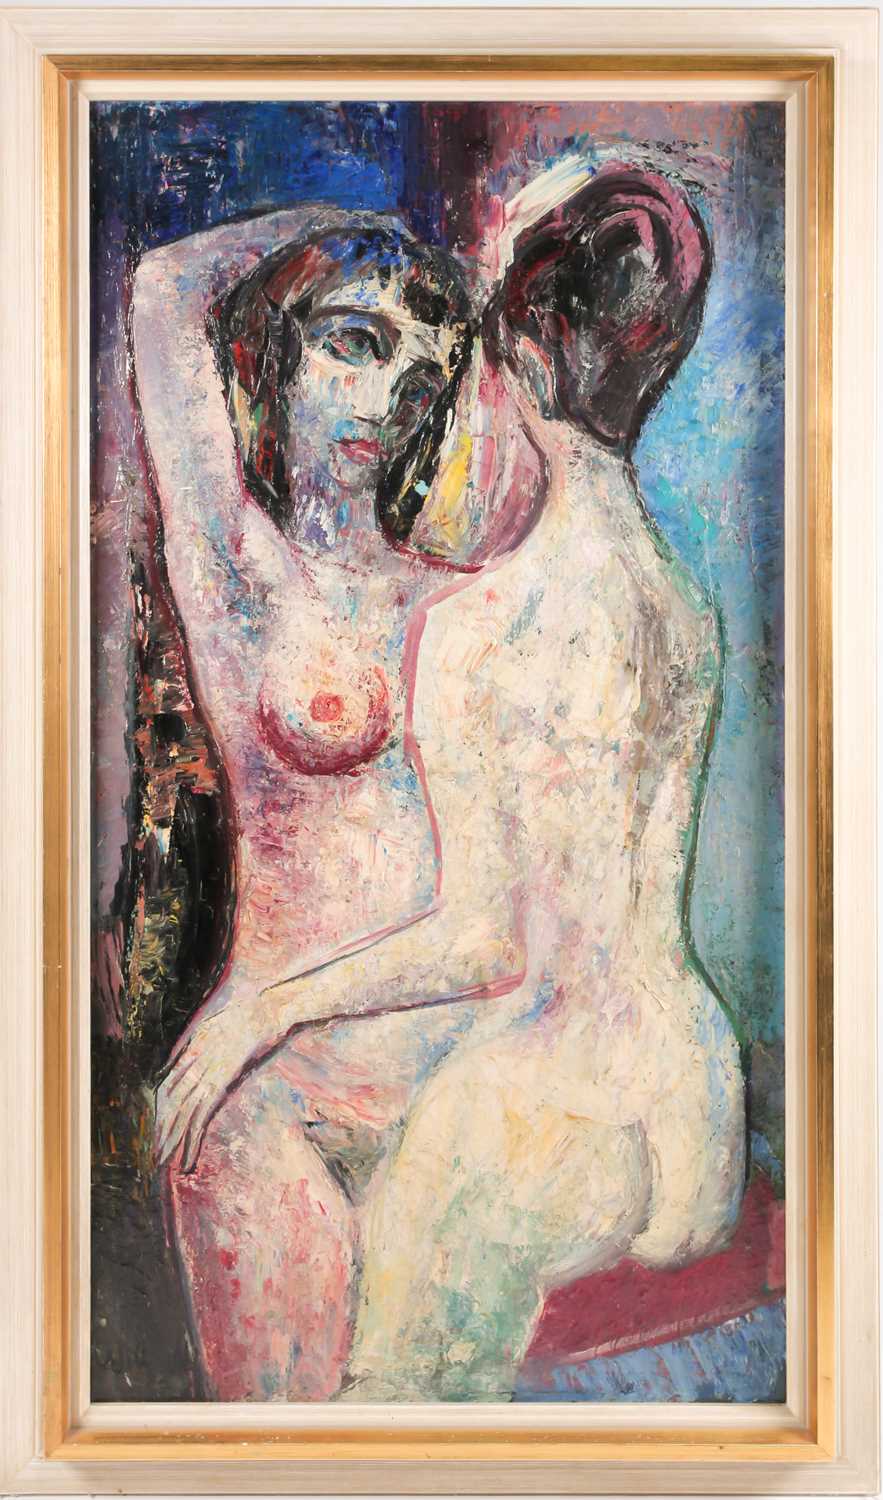 Will Sohl (1906-1969) German, abstract study of a nude couple, oil on canvas, signed and dated